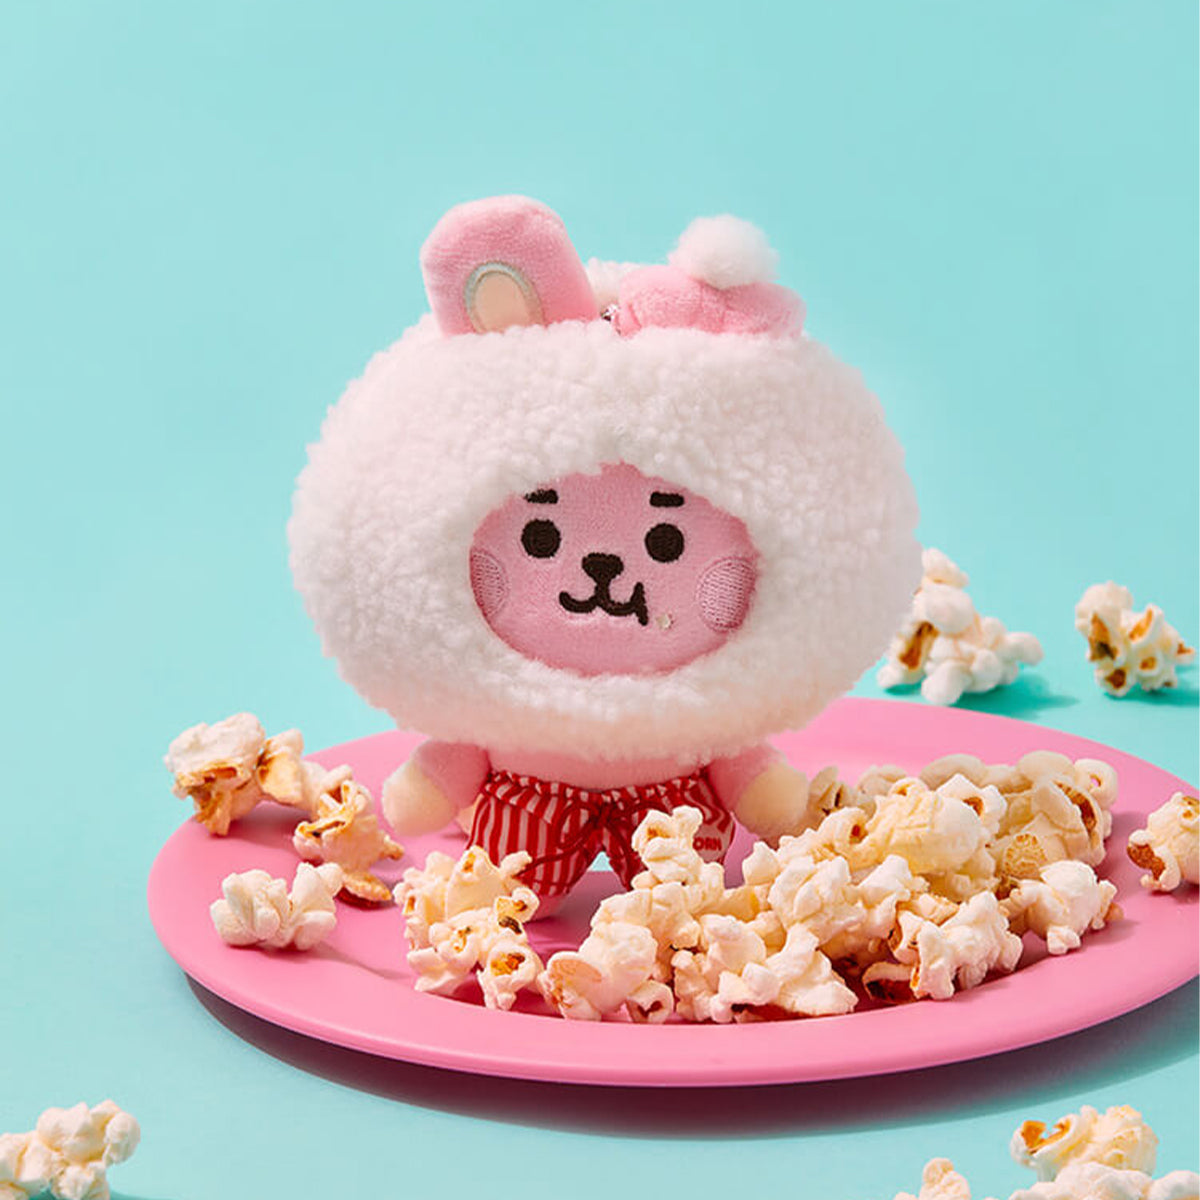 BT21 COOKY BABY Sweet Things Popcorn Bag Charm